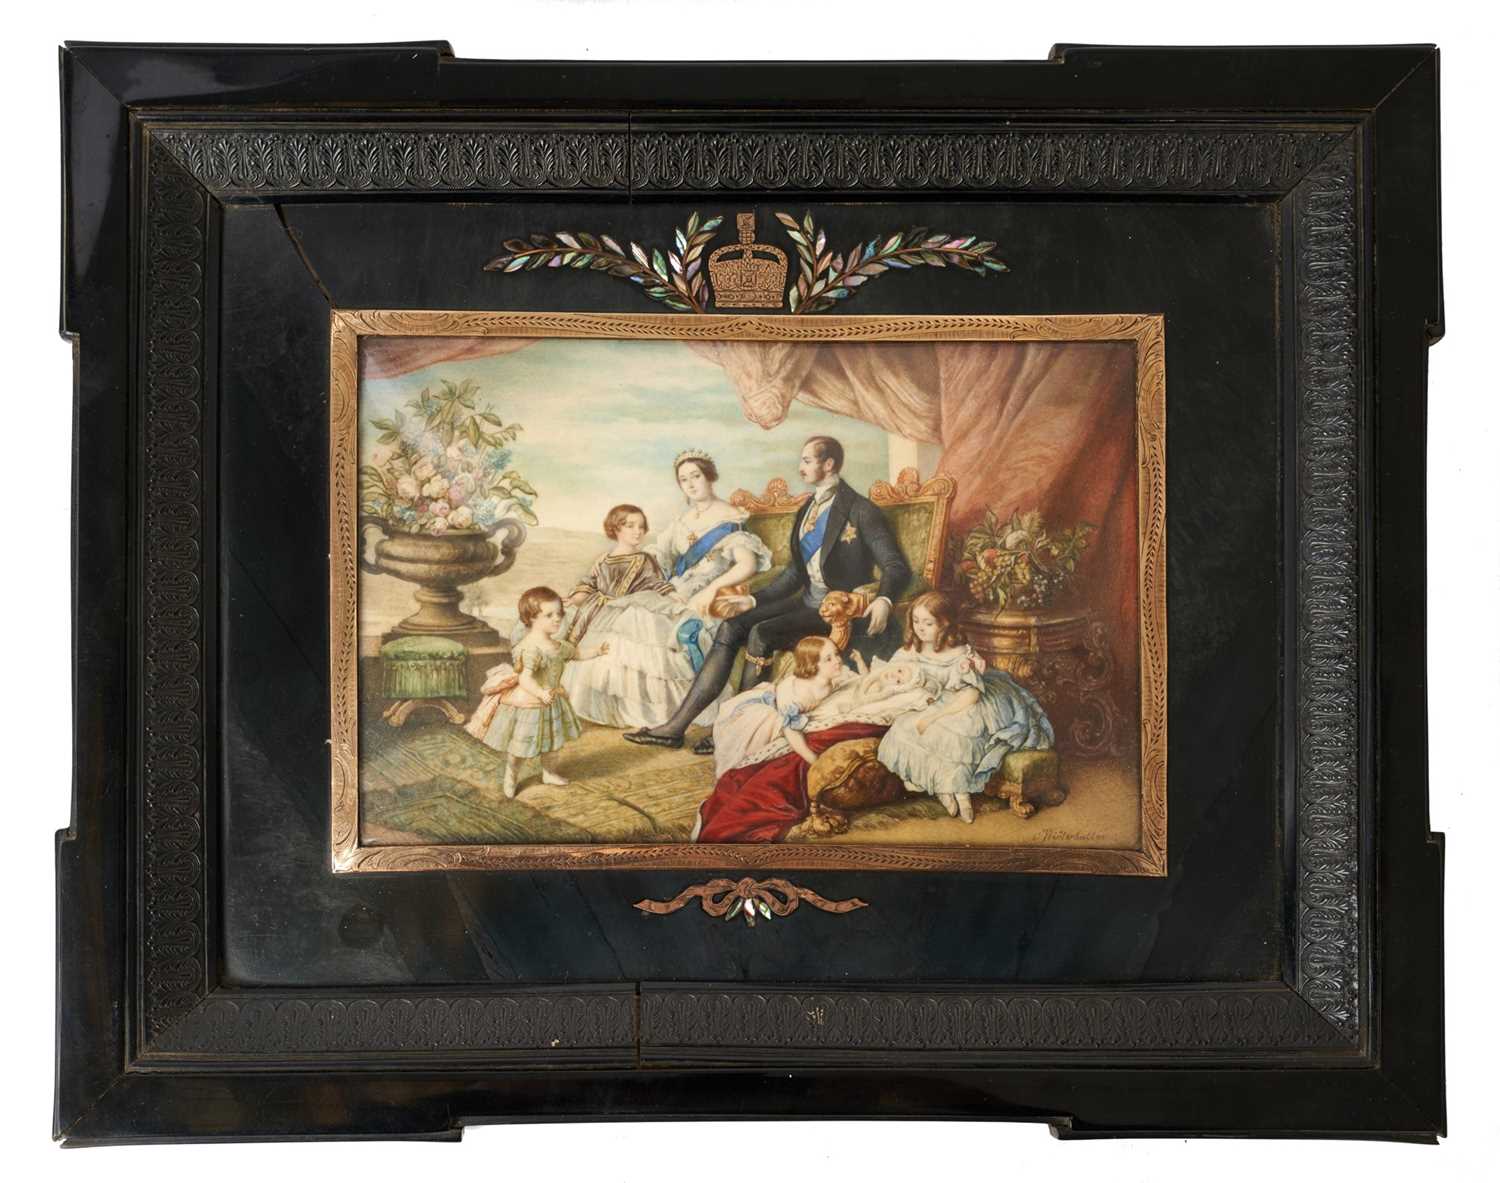 Lot 9 - After Franz Xaver Winterhalter, fine miniature on ivory portrait of Queen Victoria and her family in 1846.